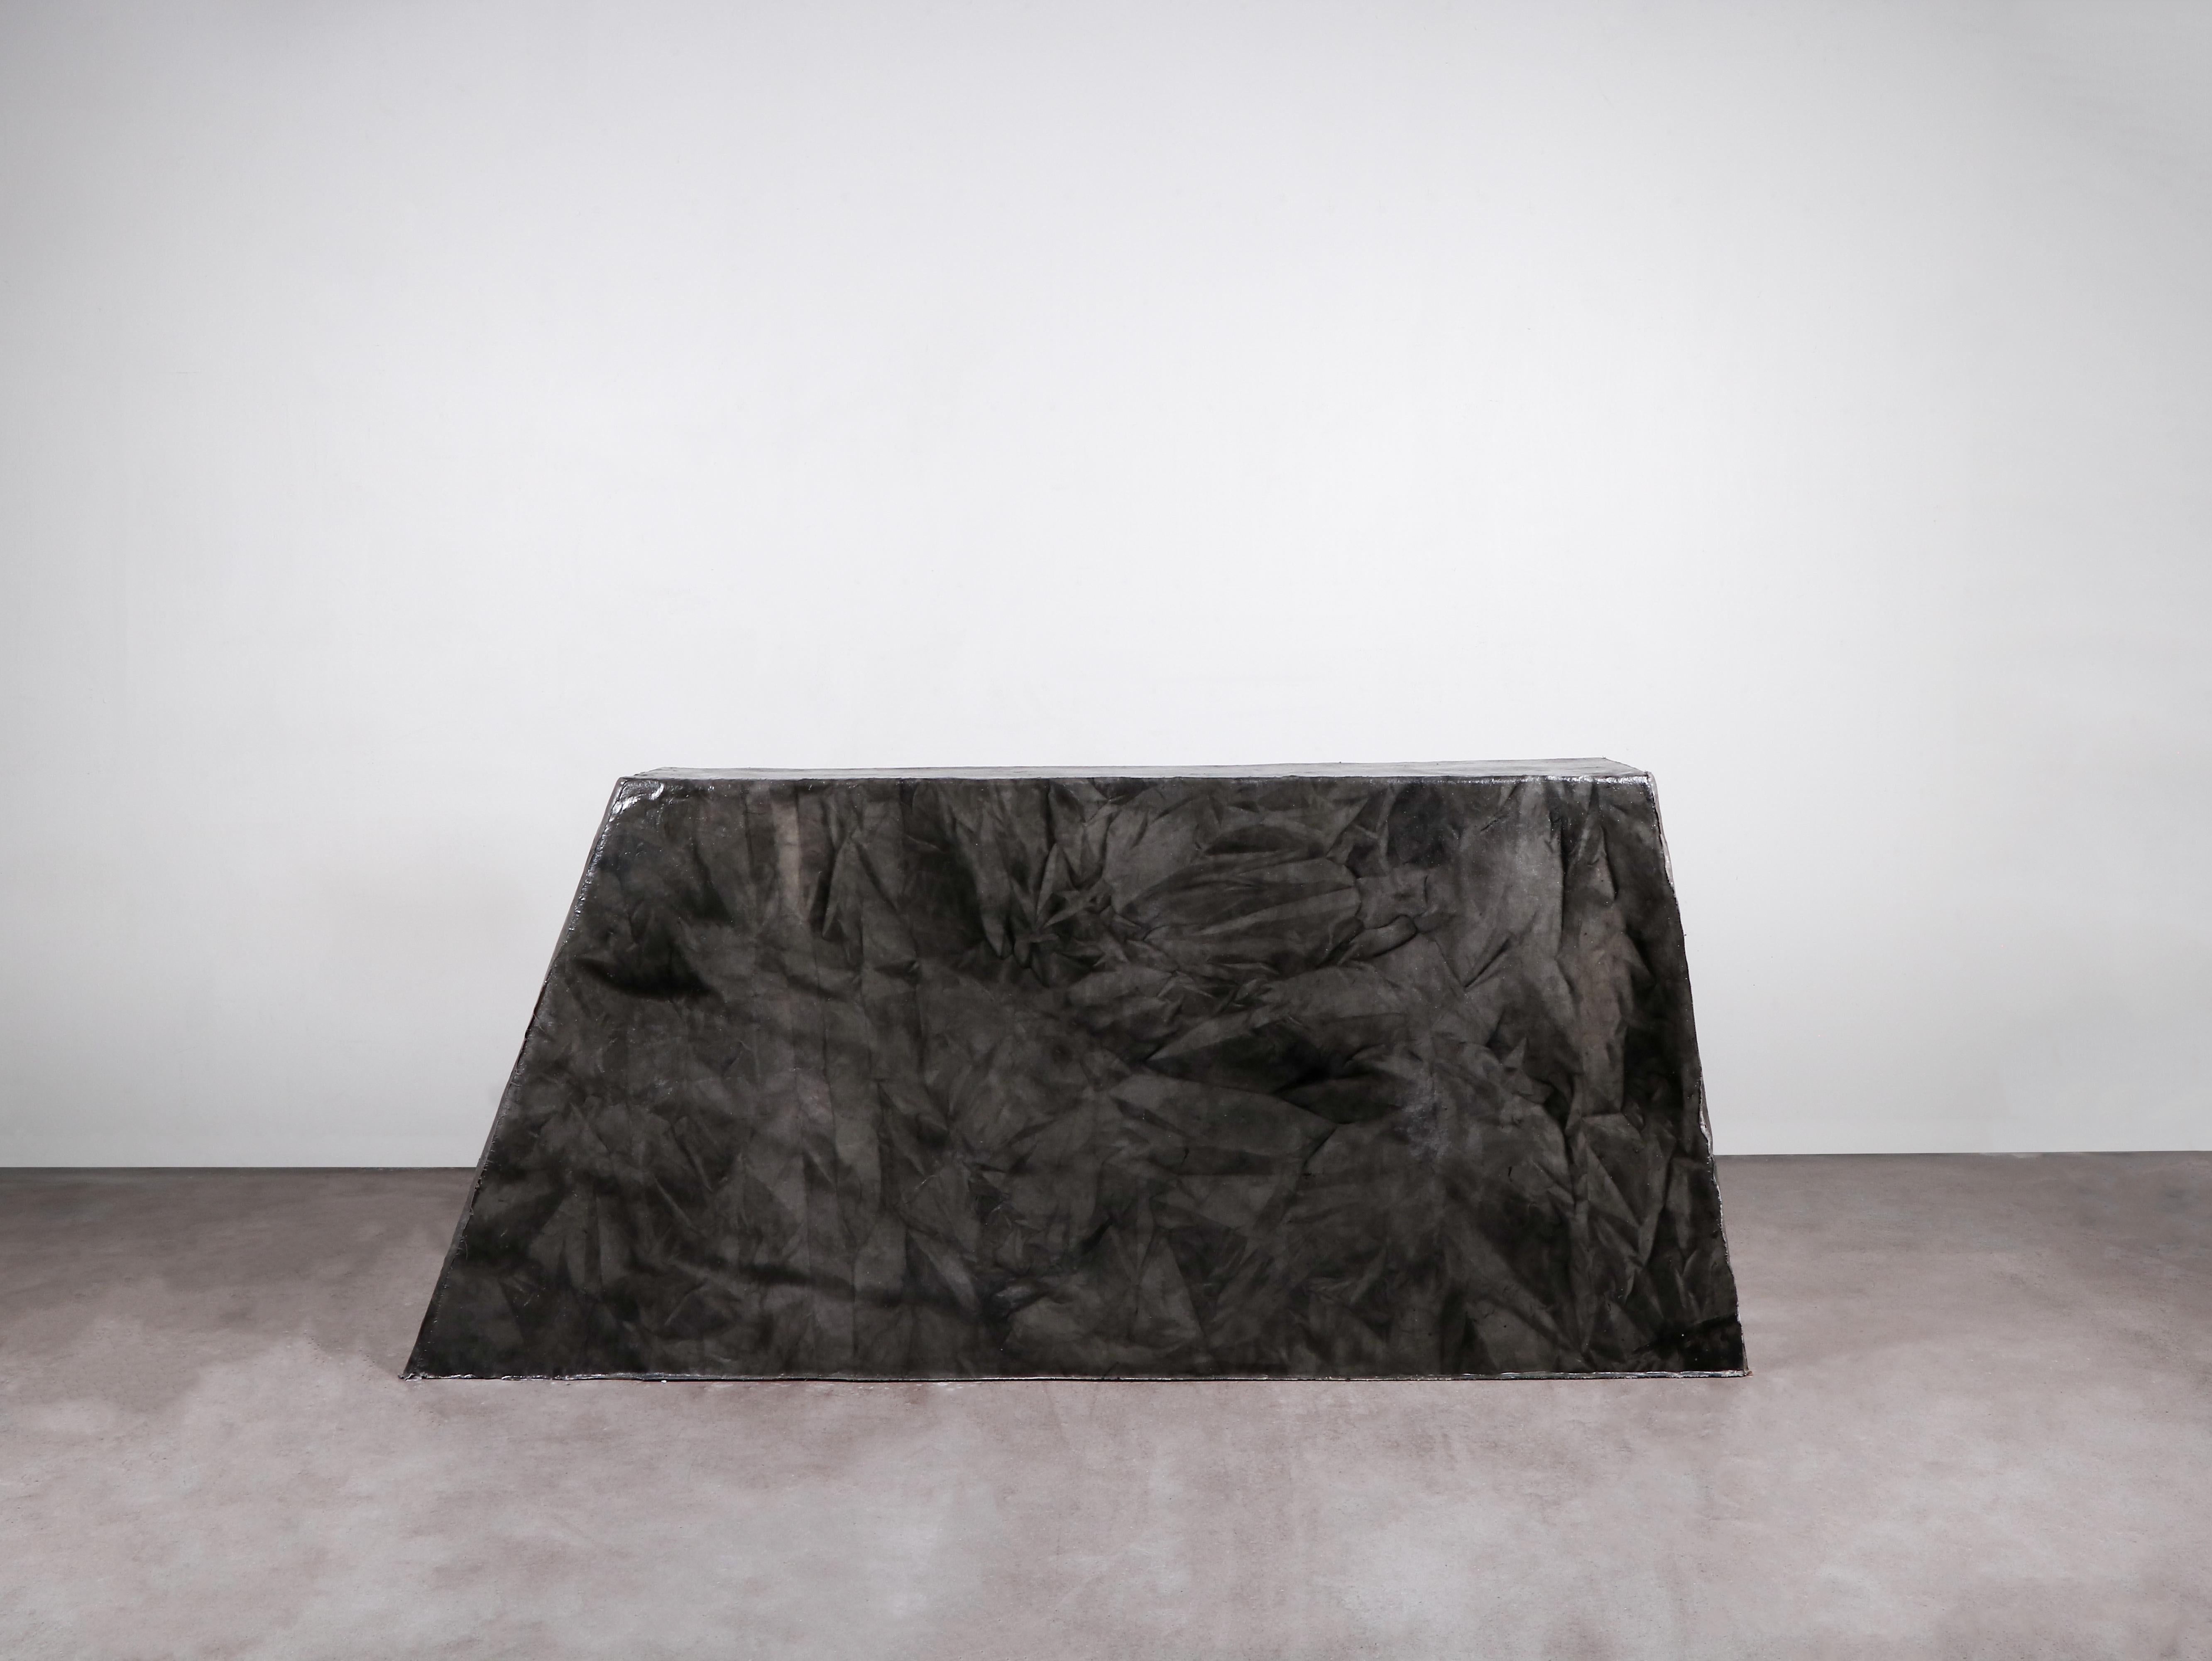 Contemporary black console in reinforced canvas on plywood - Batik console by Lucas Morten

2021
Limited edition of 13 + 1 AP
Dimensions (cm): L 180 D 40 H 80
Material: Reinforced canvas on plywood

Objects comes with a 